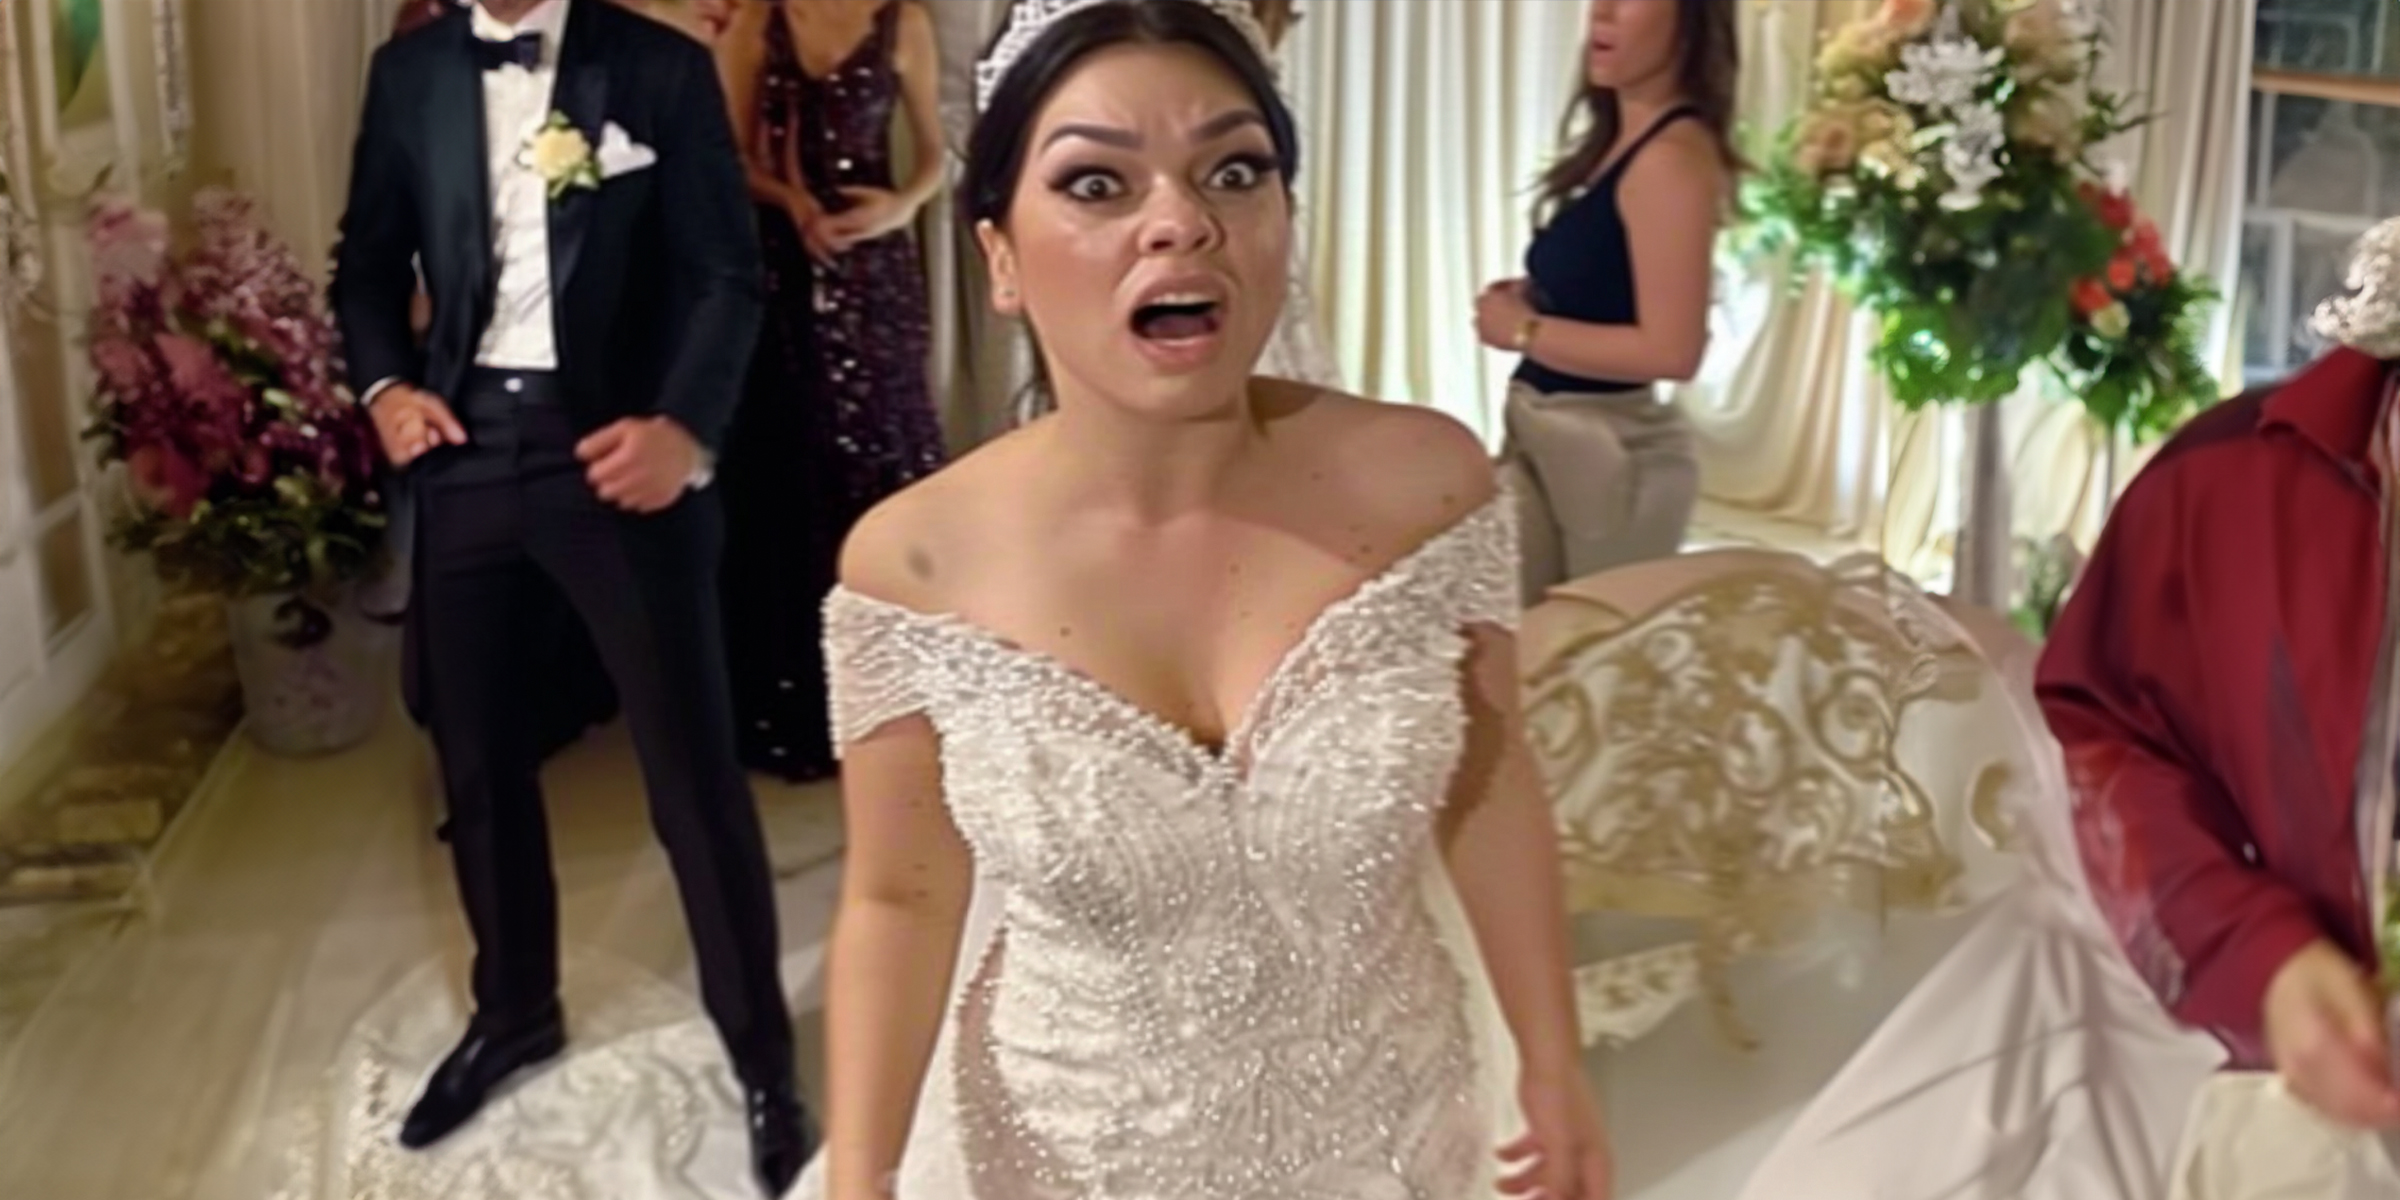 A shocked bride at her wedding | Source: AmoMama